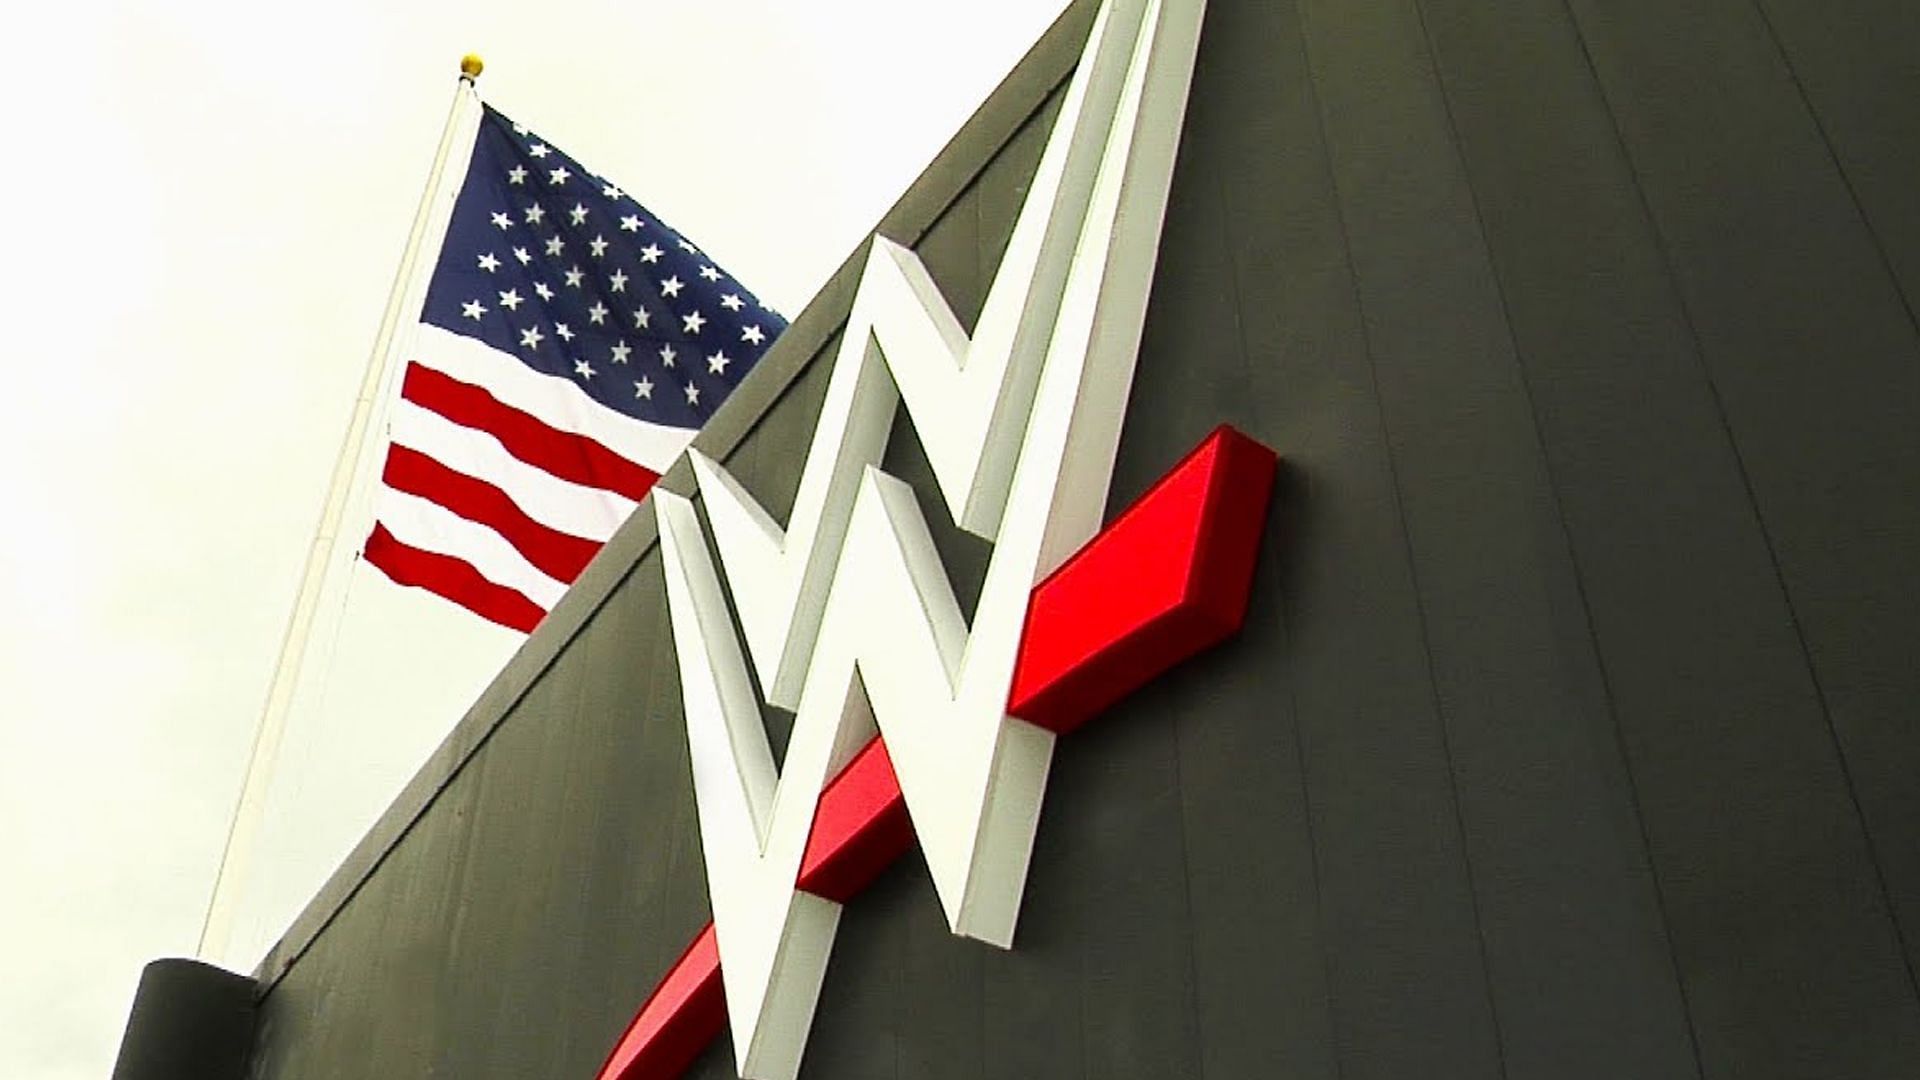 WWE has been a leader in professional wrestling for 40 years